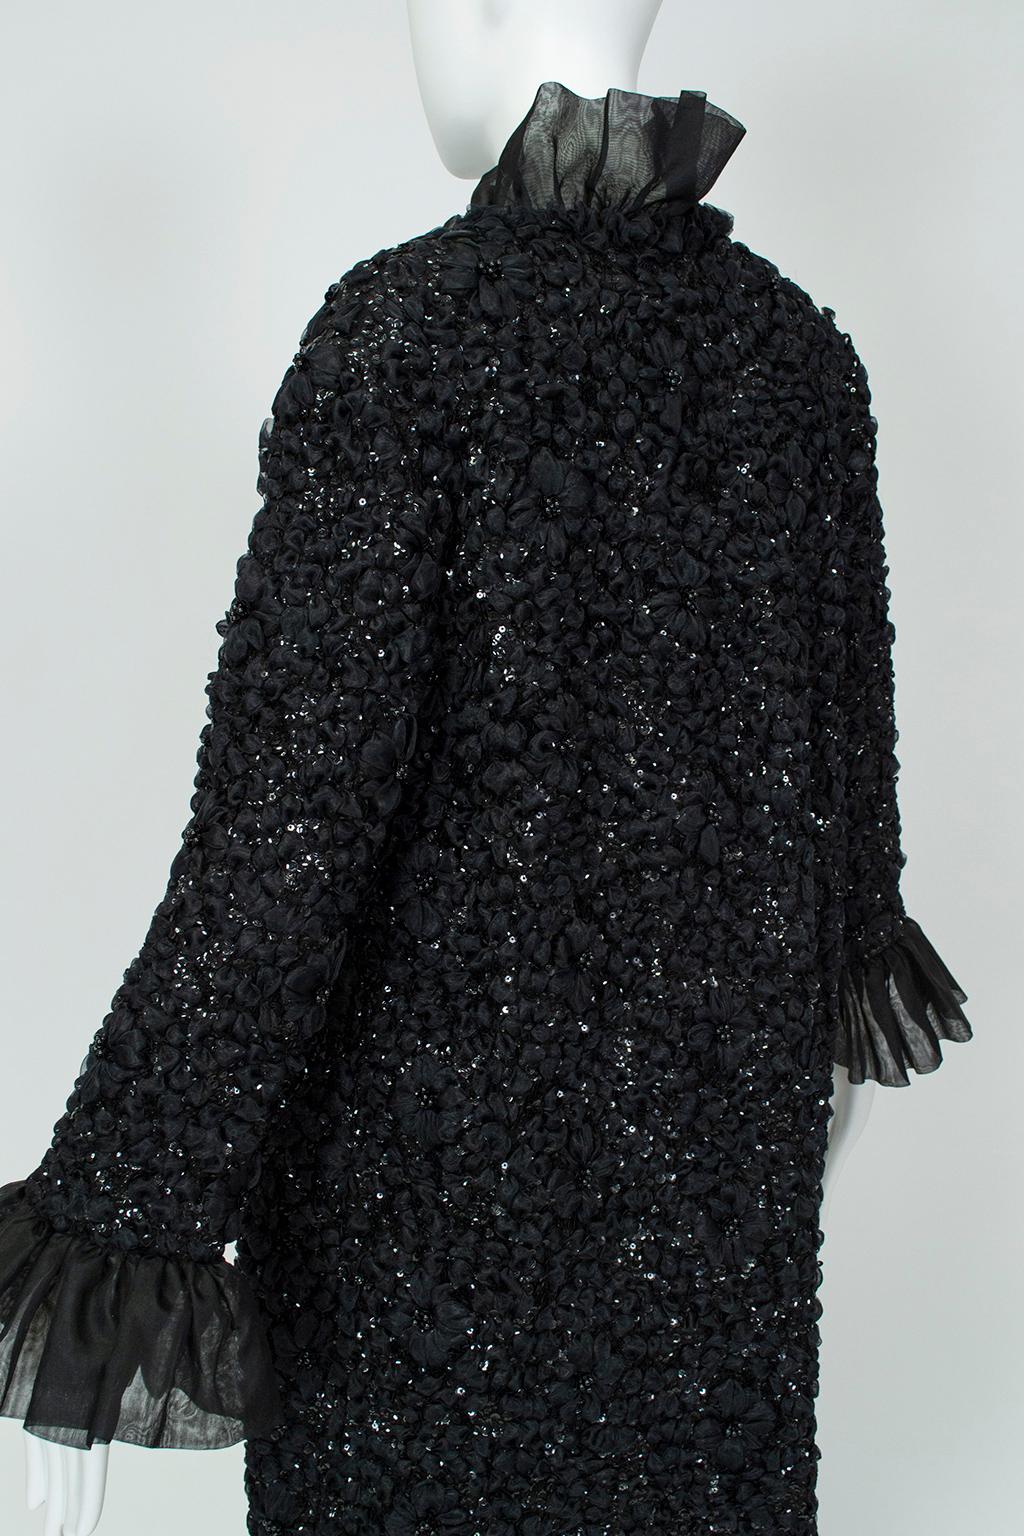 Sparkling Tufted Black Chiffon Ruffled Evening Coat with Bell Cuffs - S-M, 1960s 1